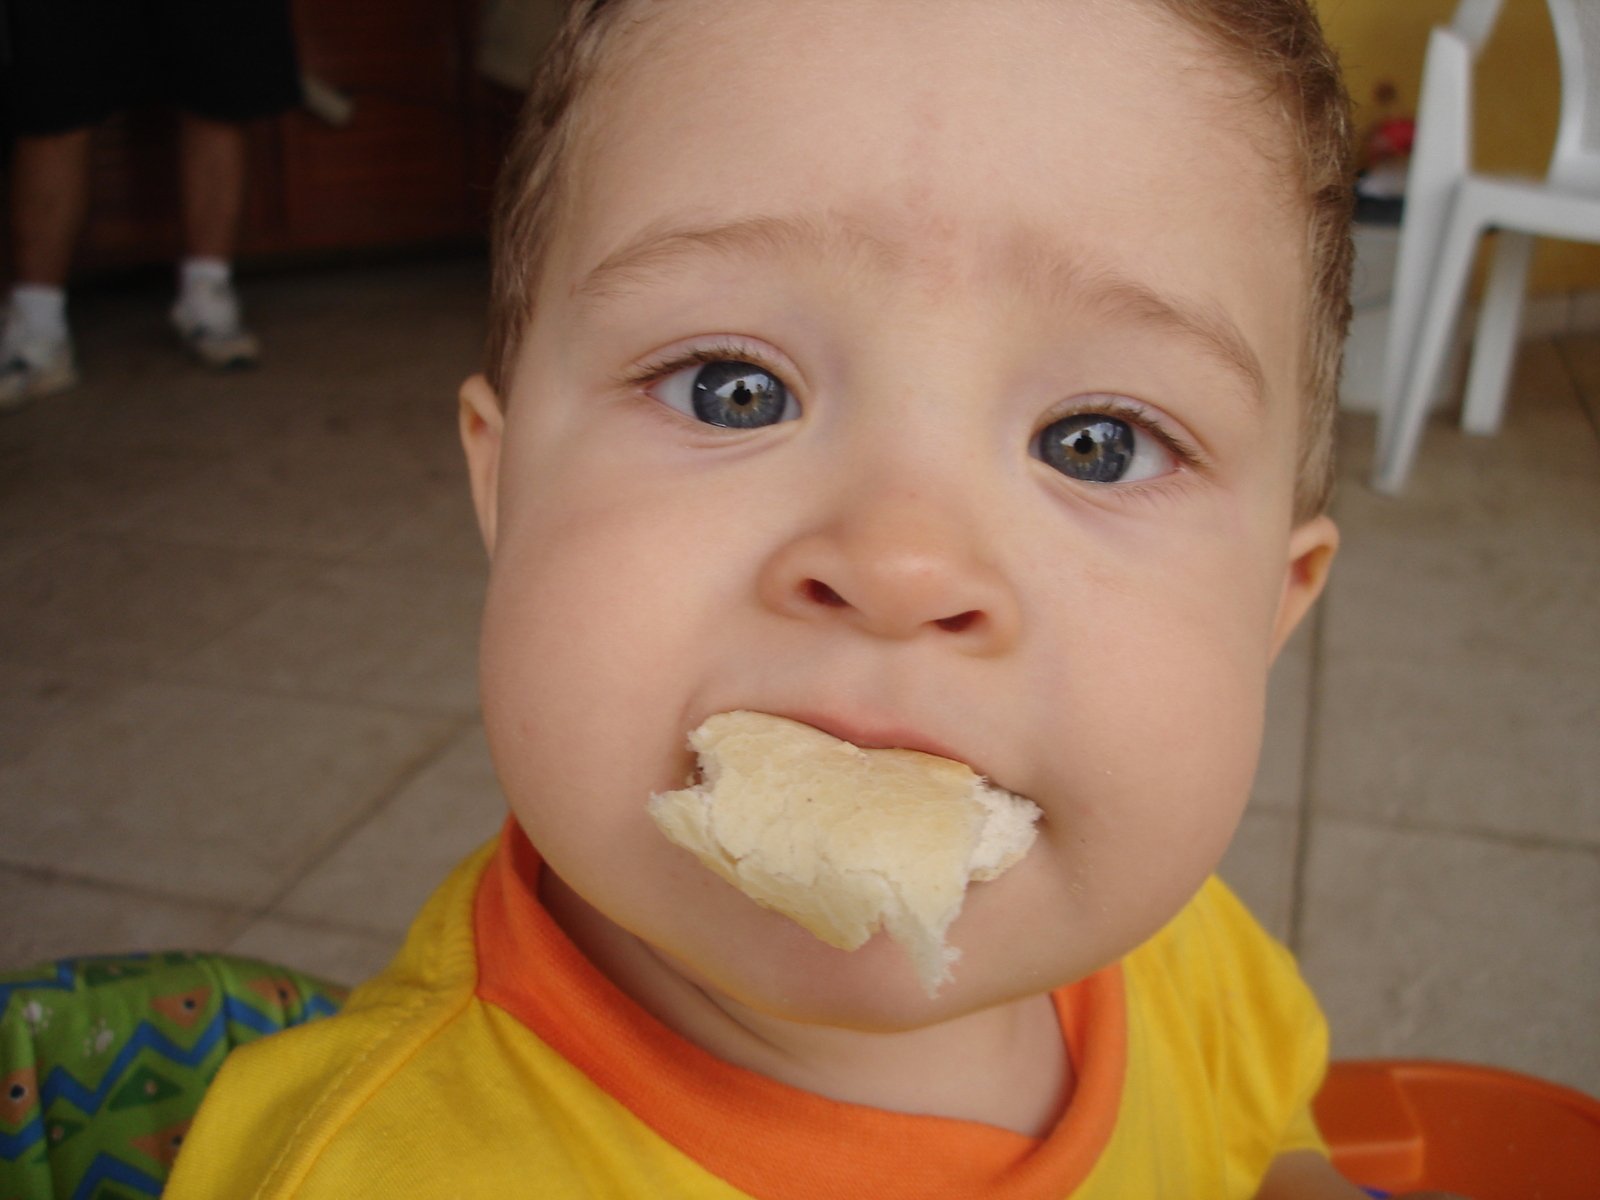 a young child wearing yellow is eating soing